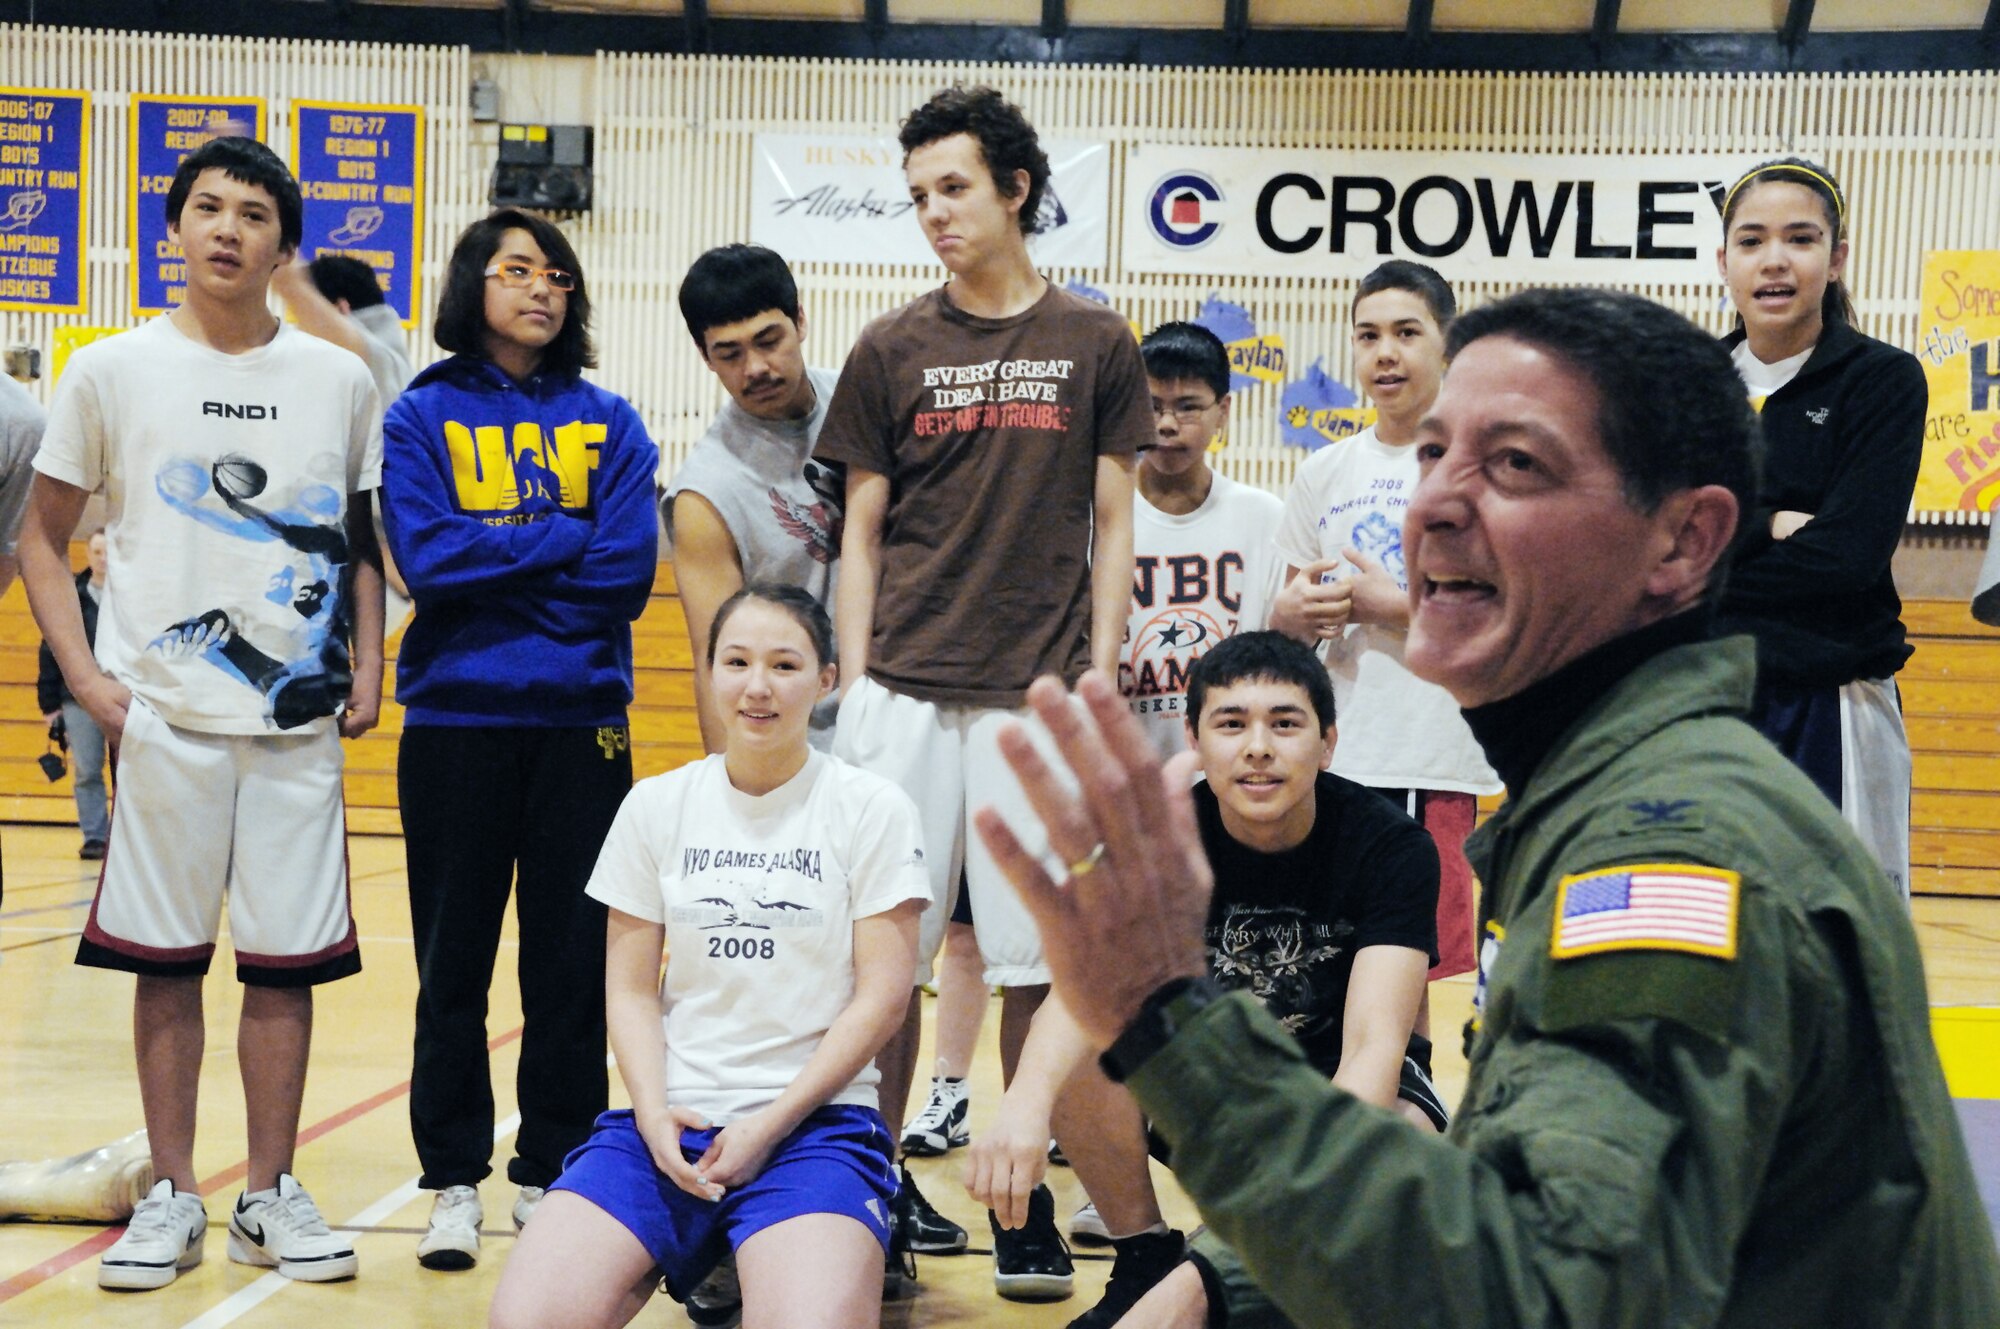 Col. Dominic DeFrancis laughs with students from Kotzebue High School during his visit for Operation Arctic Care 2010 April 16 through 17 in Kotzebue, Alaska. Colonel DeFrancis is the Air Force Reserve Command Surgeon General. (U.S. Air Force photo/Tech. Sgt. Melissa E. Chatham)